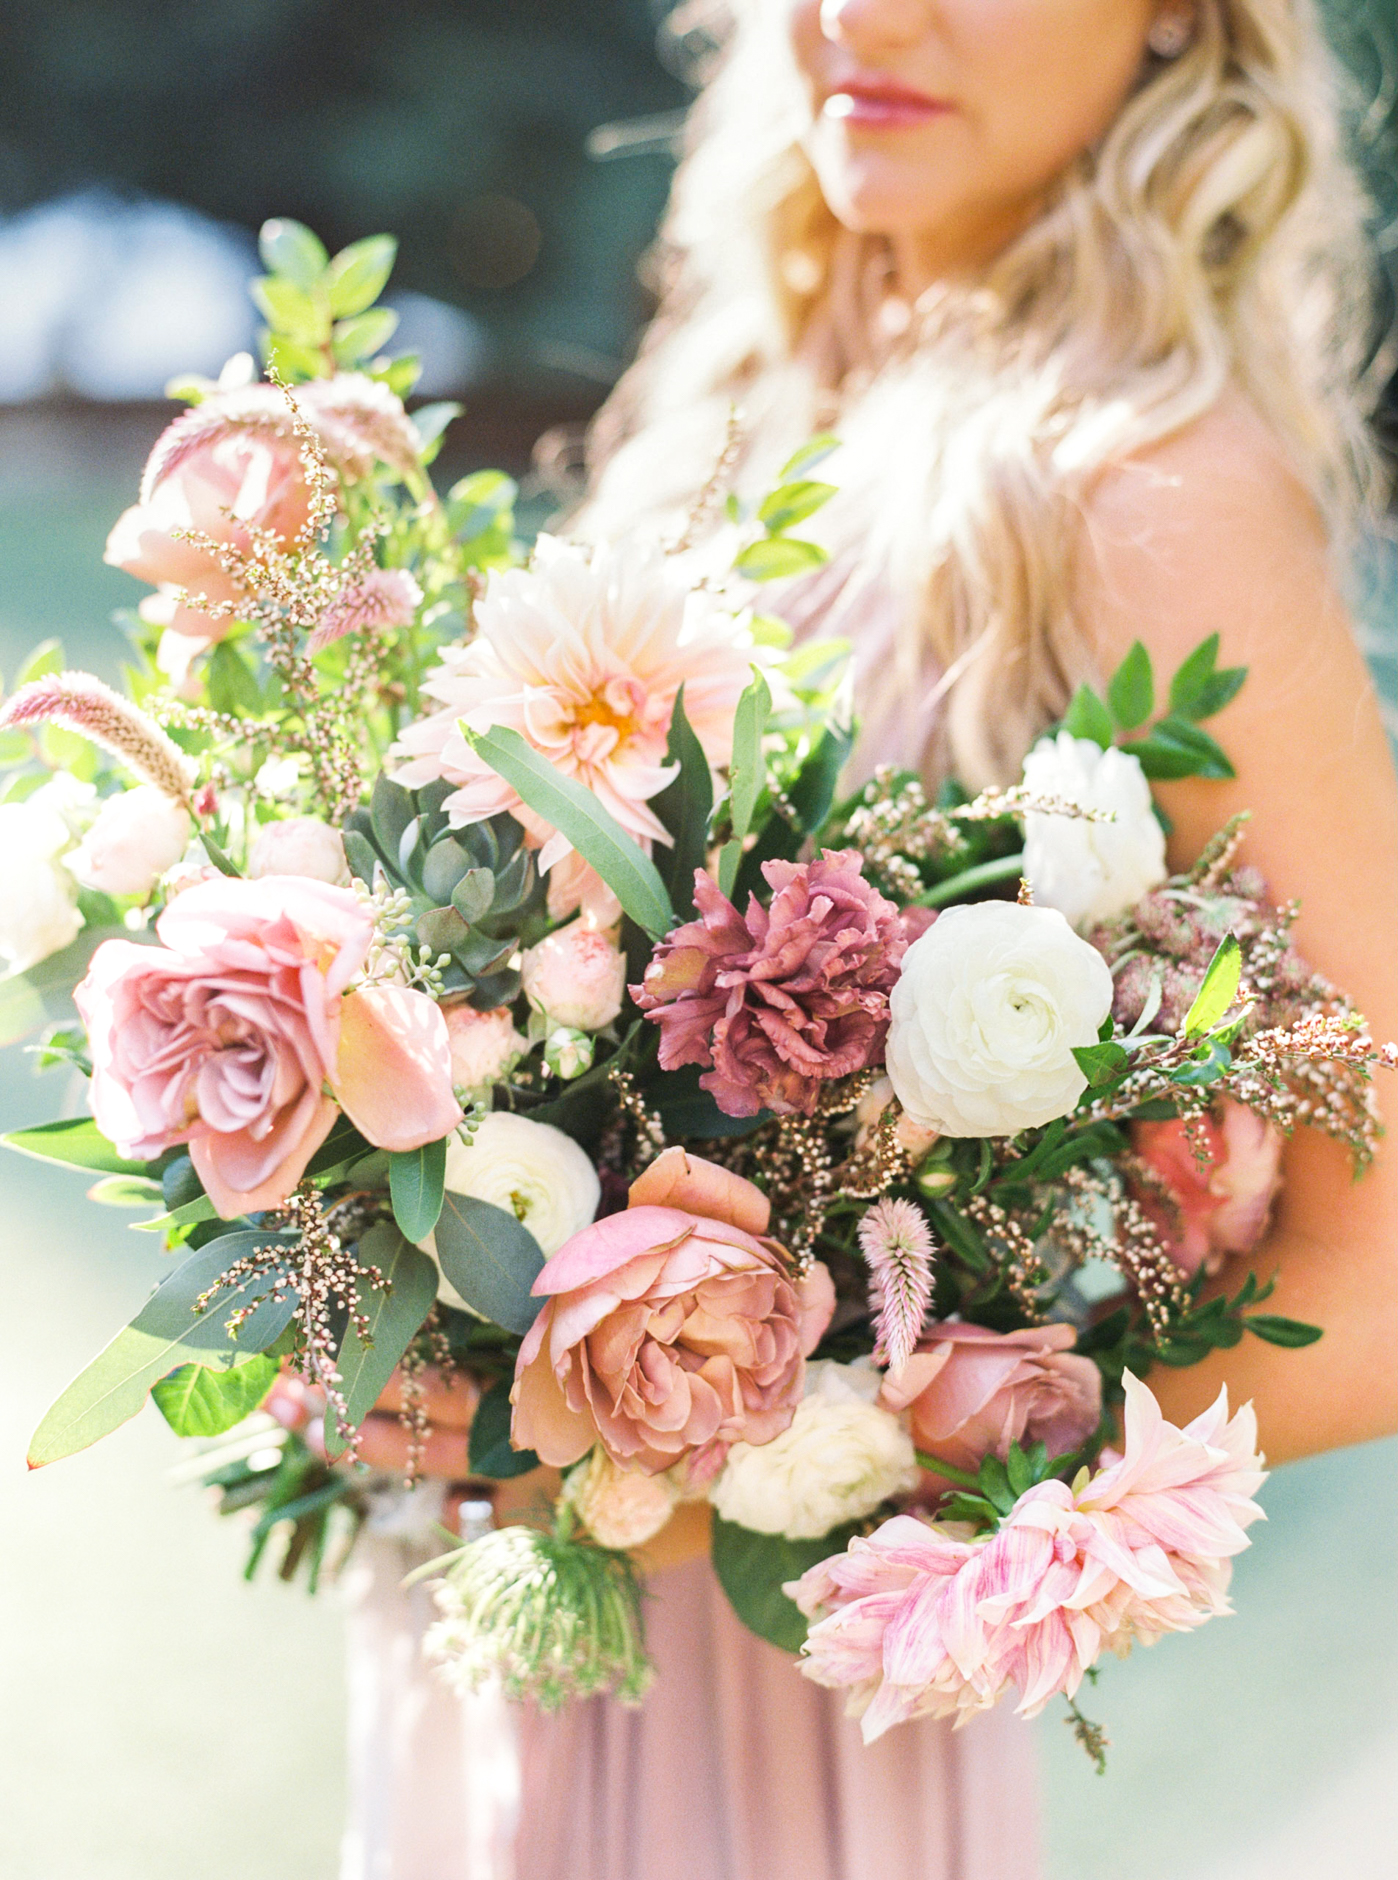 Mauve and white bouquet filled with dahlias and roses by Graceful Garland Co